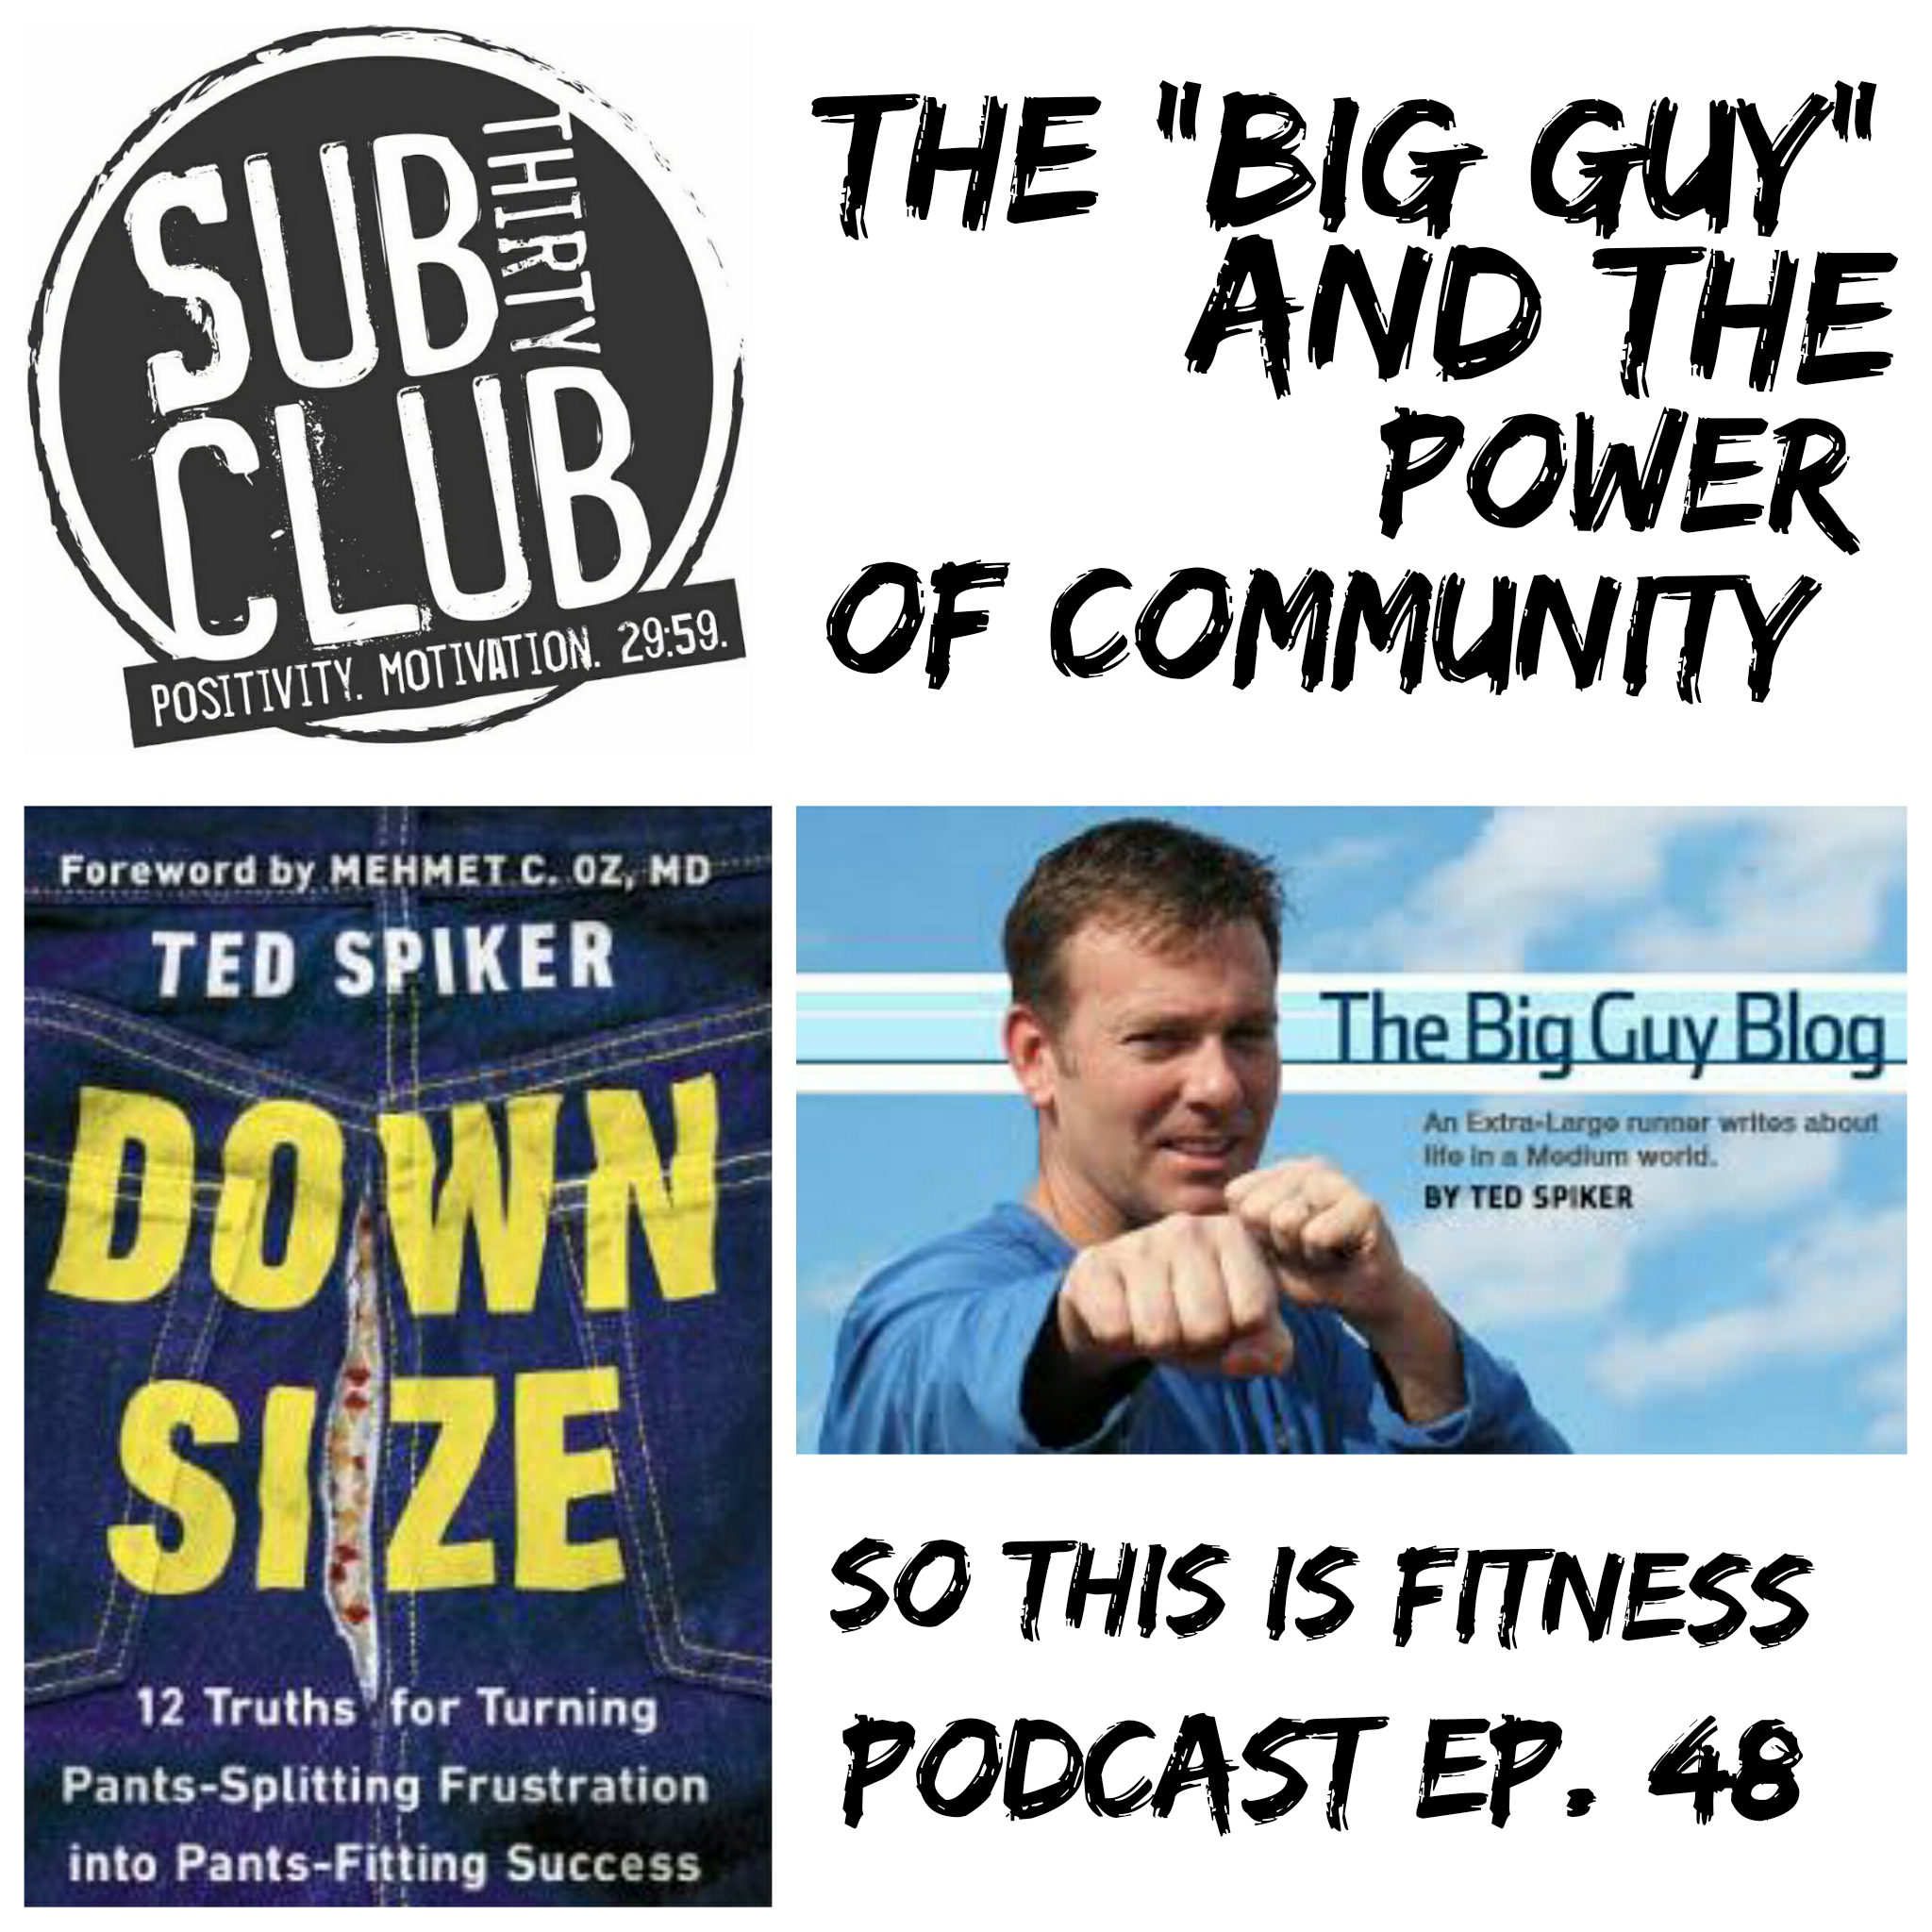 The “Big Guy” And The Power Of Community (Podcast #48)